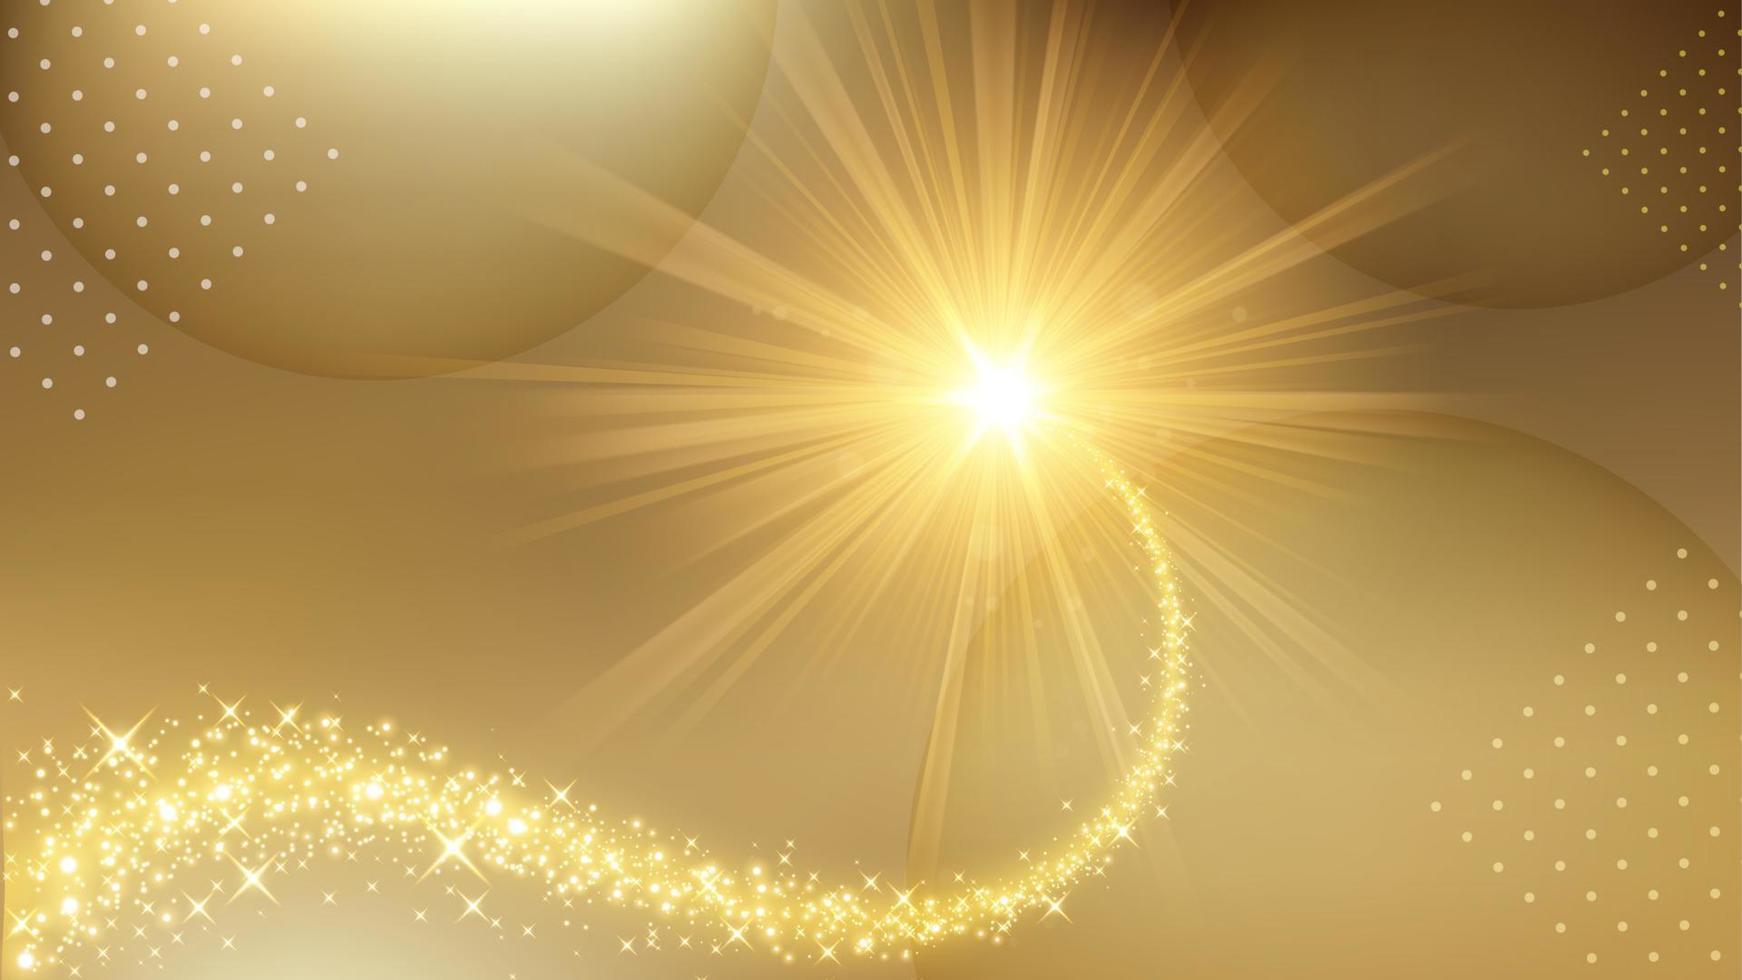 Sparkling Particle Motion Background, Elegant Gold Trail Crossing. Widescreen Vector Illustration